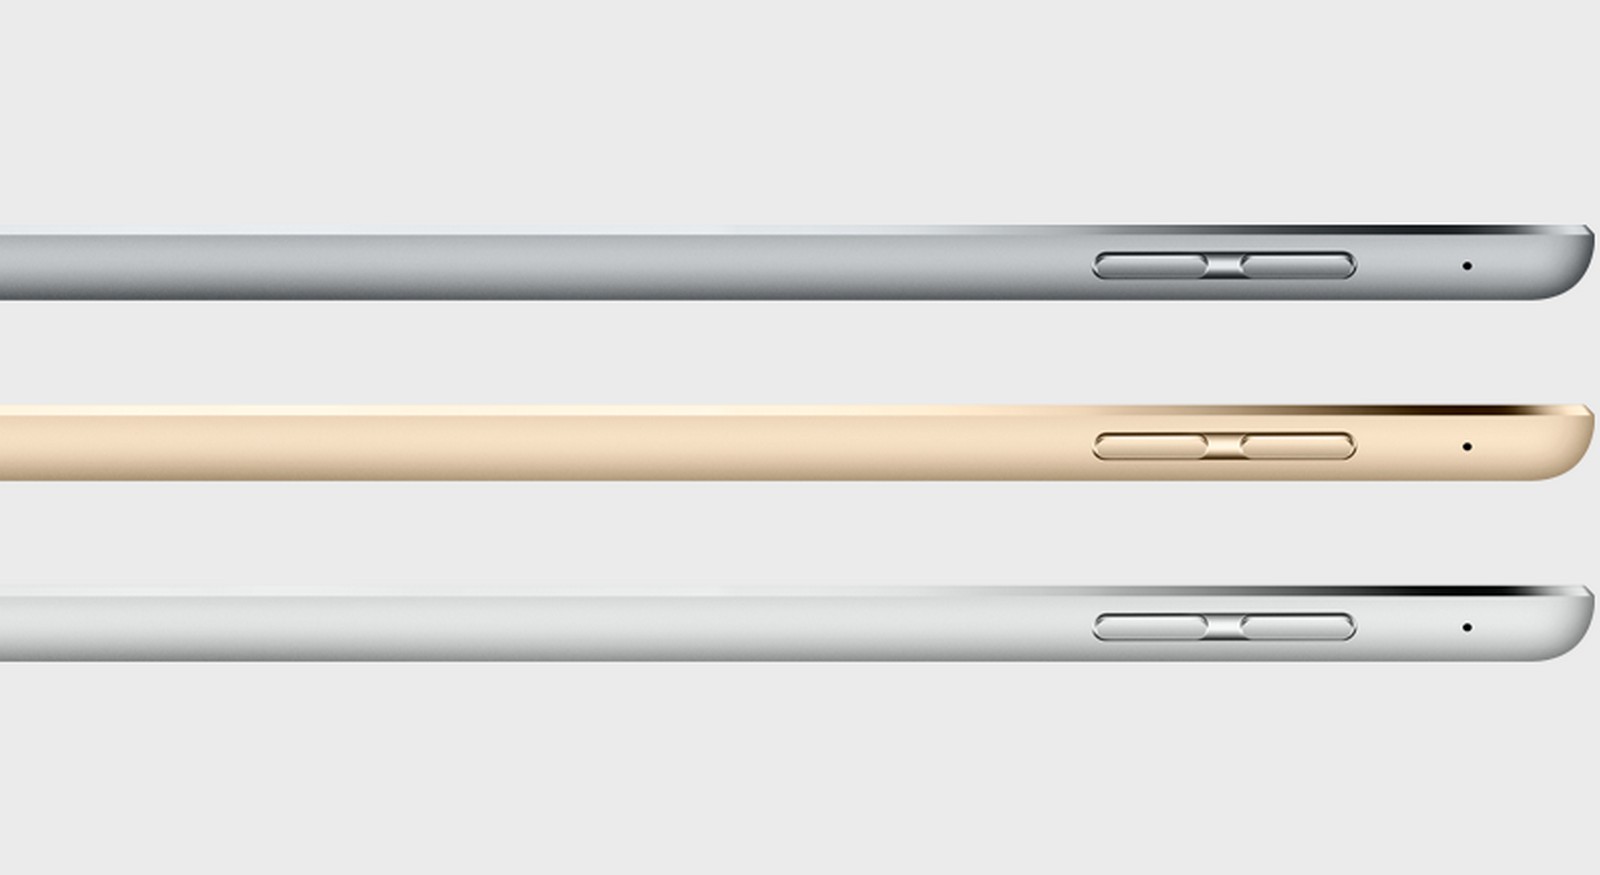 Apple iPad Pro all the official images 1 - Apple iPad Pro announced with Apple Pencil and a Smart Keyboard